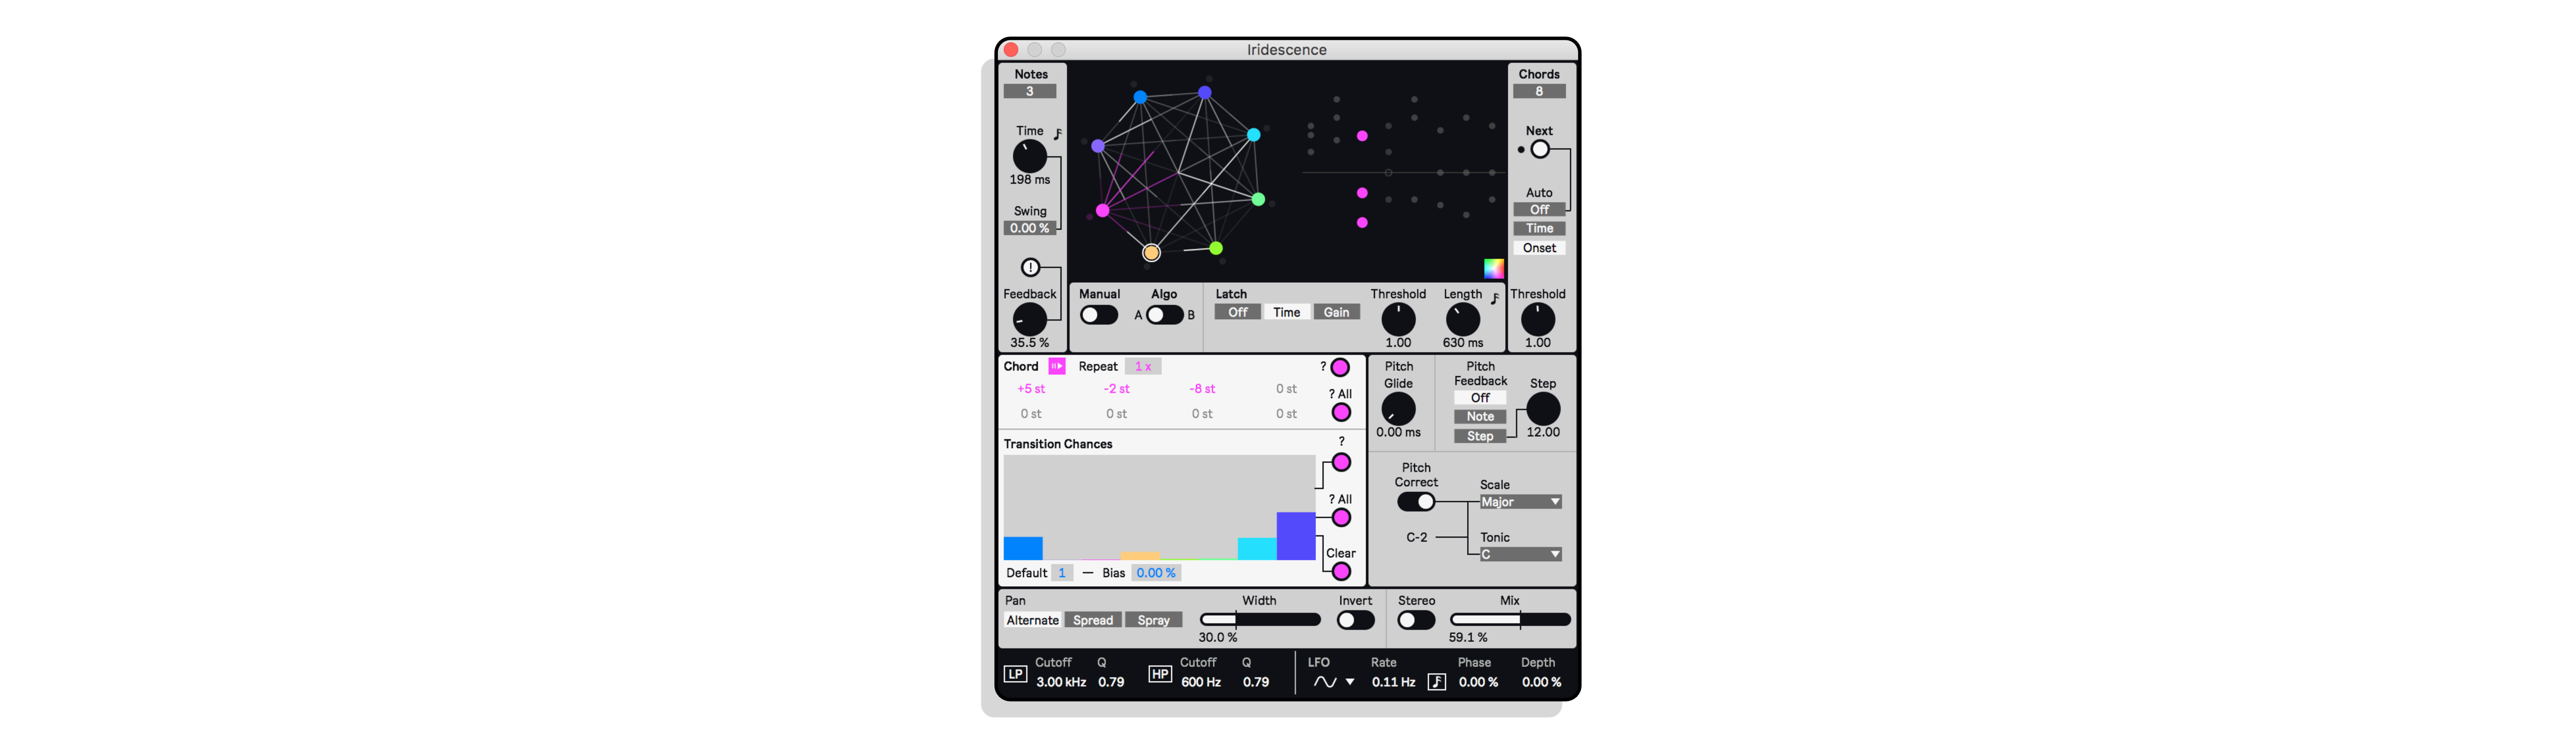 Iridescence MaxforLive Device for Ableton Live by Dillon Bastan